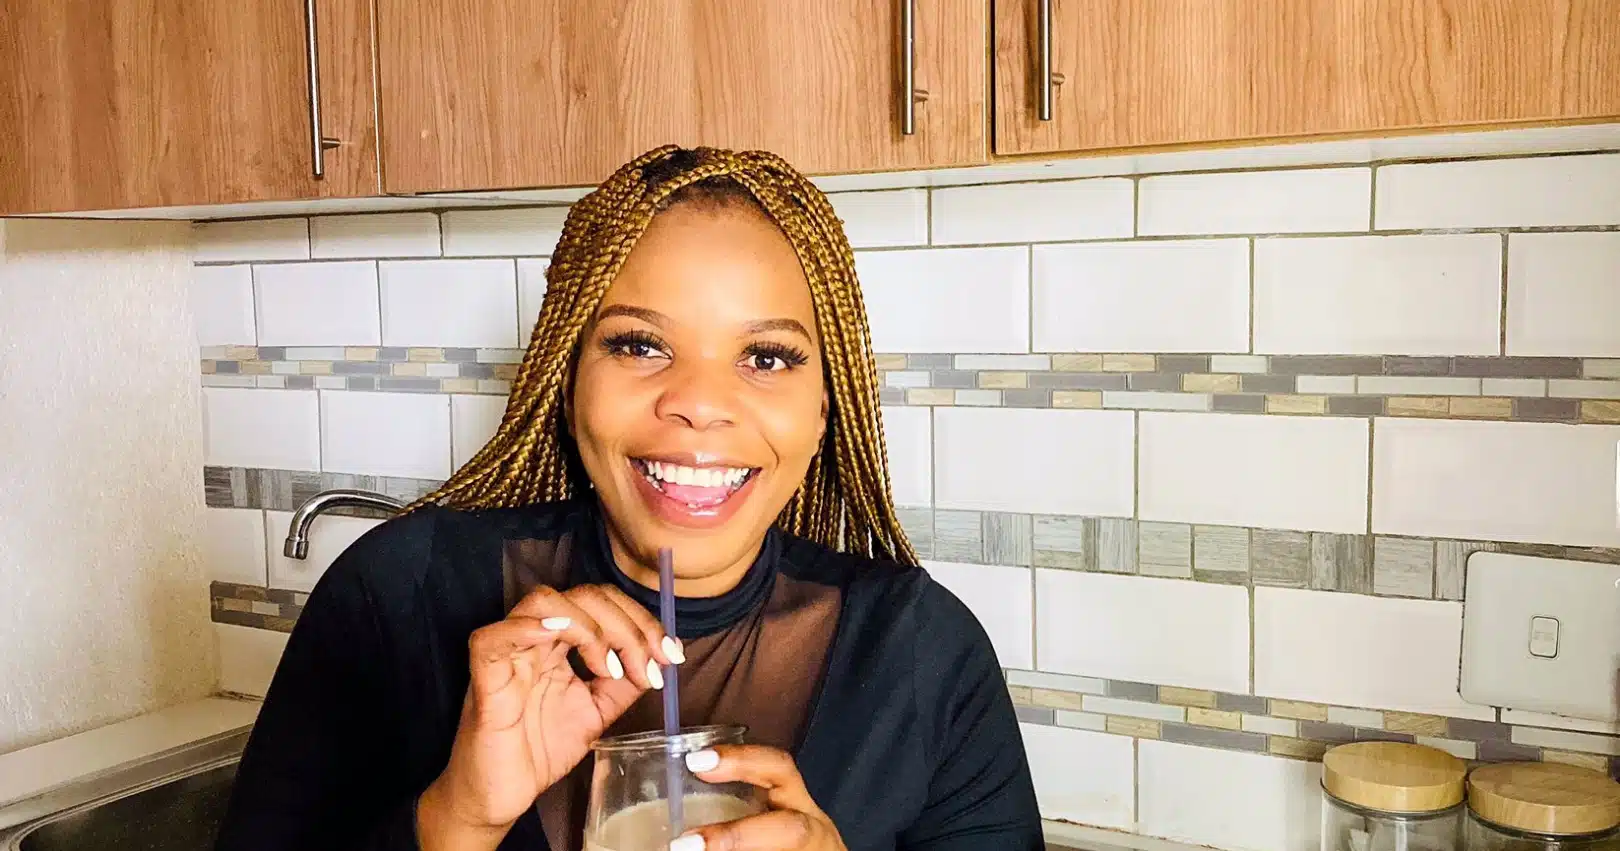 South African woman vents online as boyfriend of 7 years marries another lady on her 34th birthday